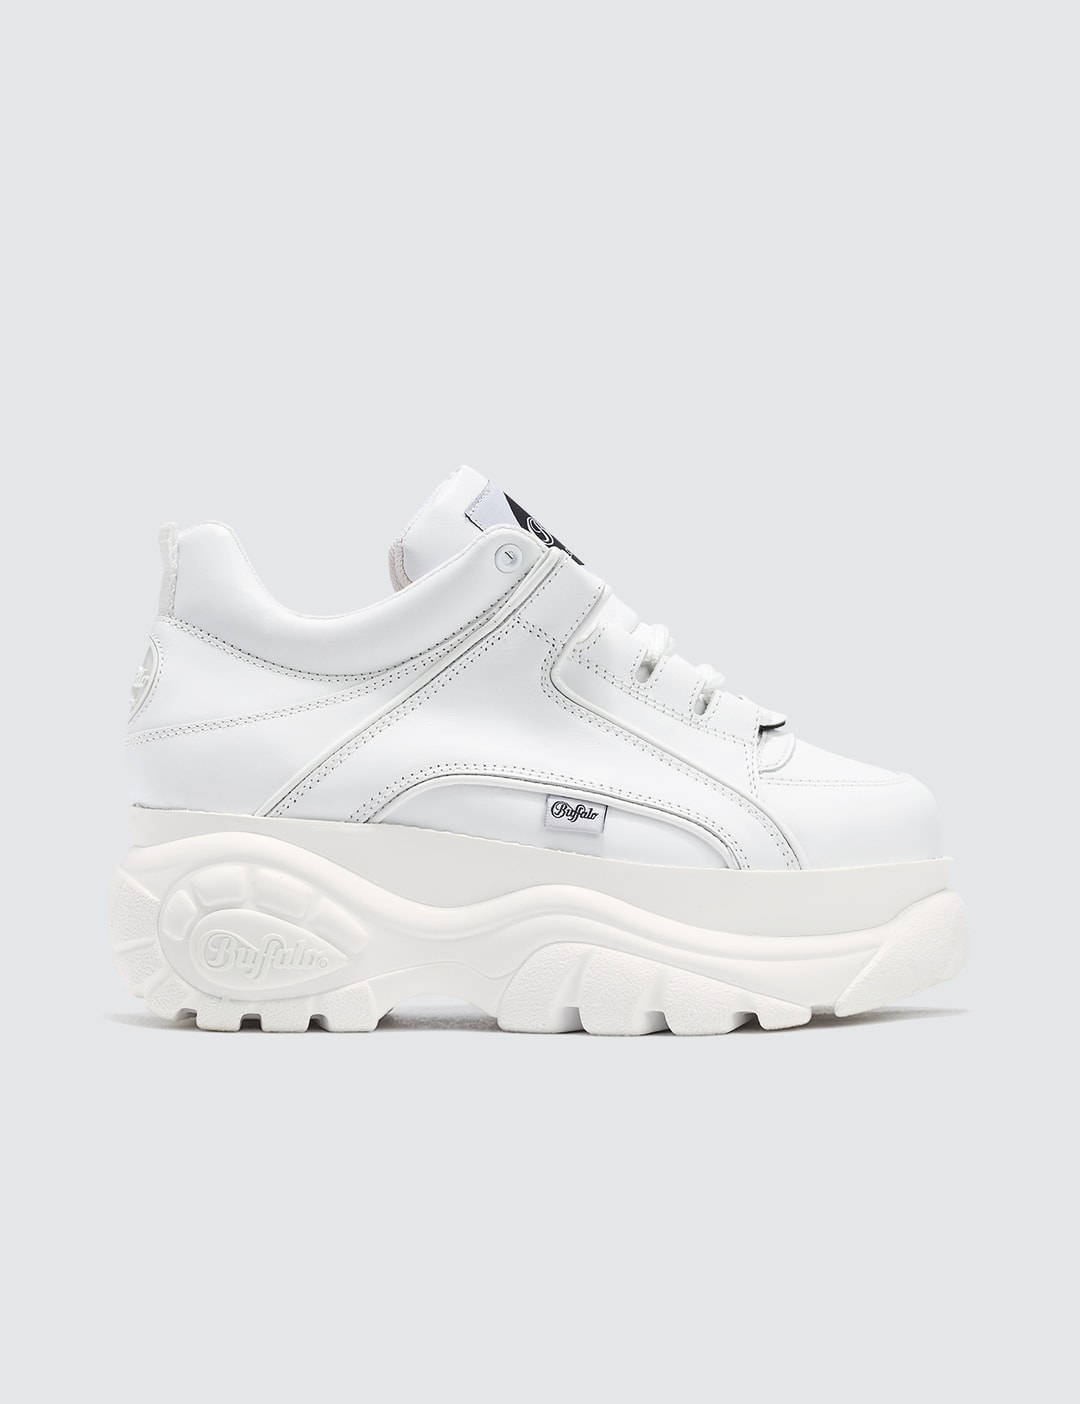 London - Buffalo Classic White Low-top Platform Sneakers | - Globally Curated Fashion and Lifestyle by Hypebeast